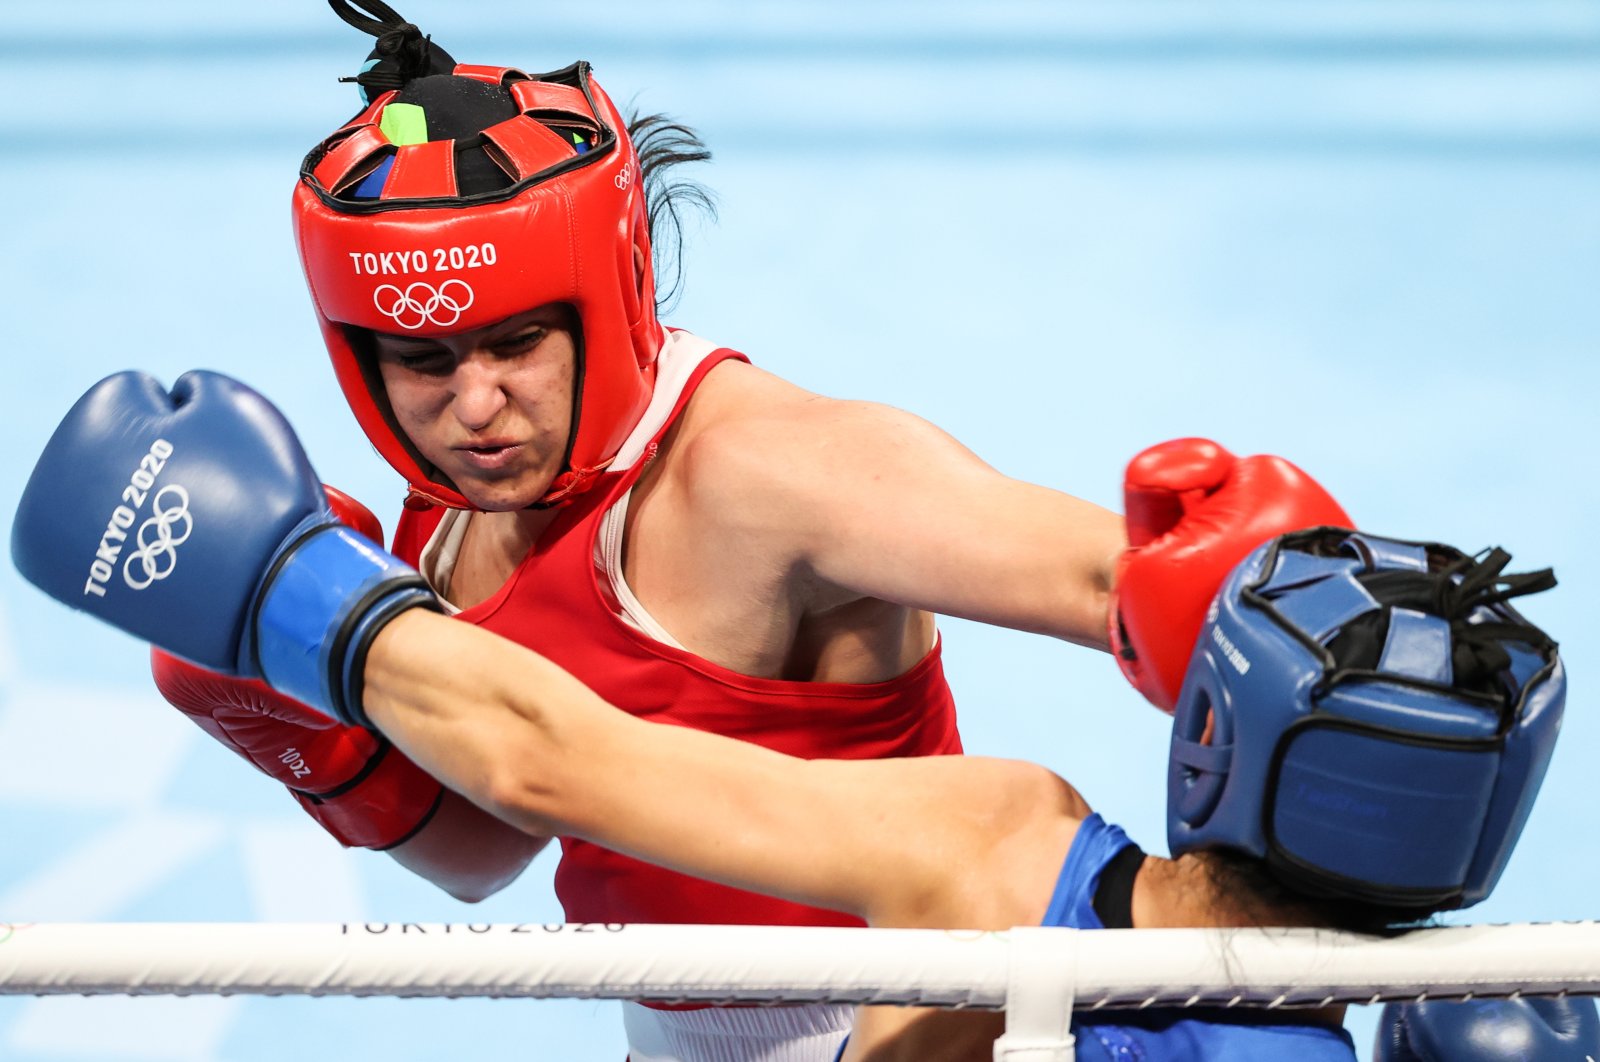 Busenaz Sürmeneli, in red, in her fight against China's Gu Hong at the 2020 Tokyo Olympics, Japan, Aug. 7, 2021. (AA Photo)